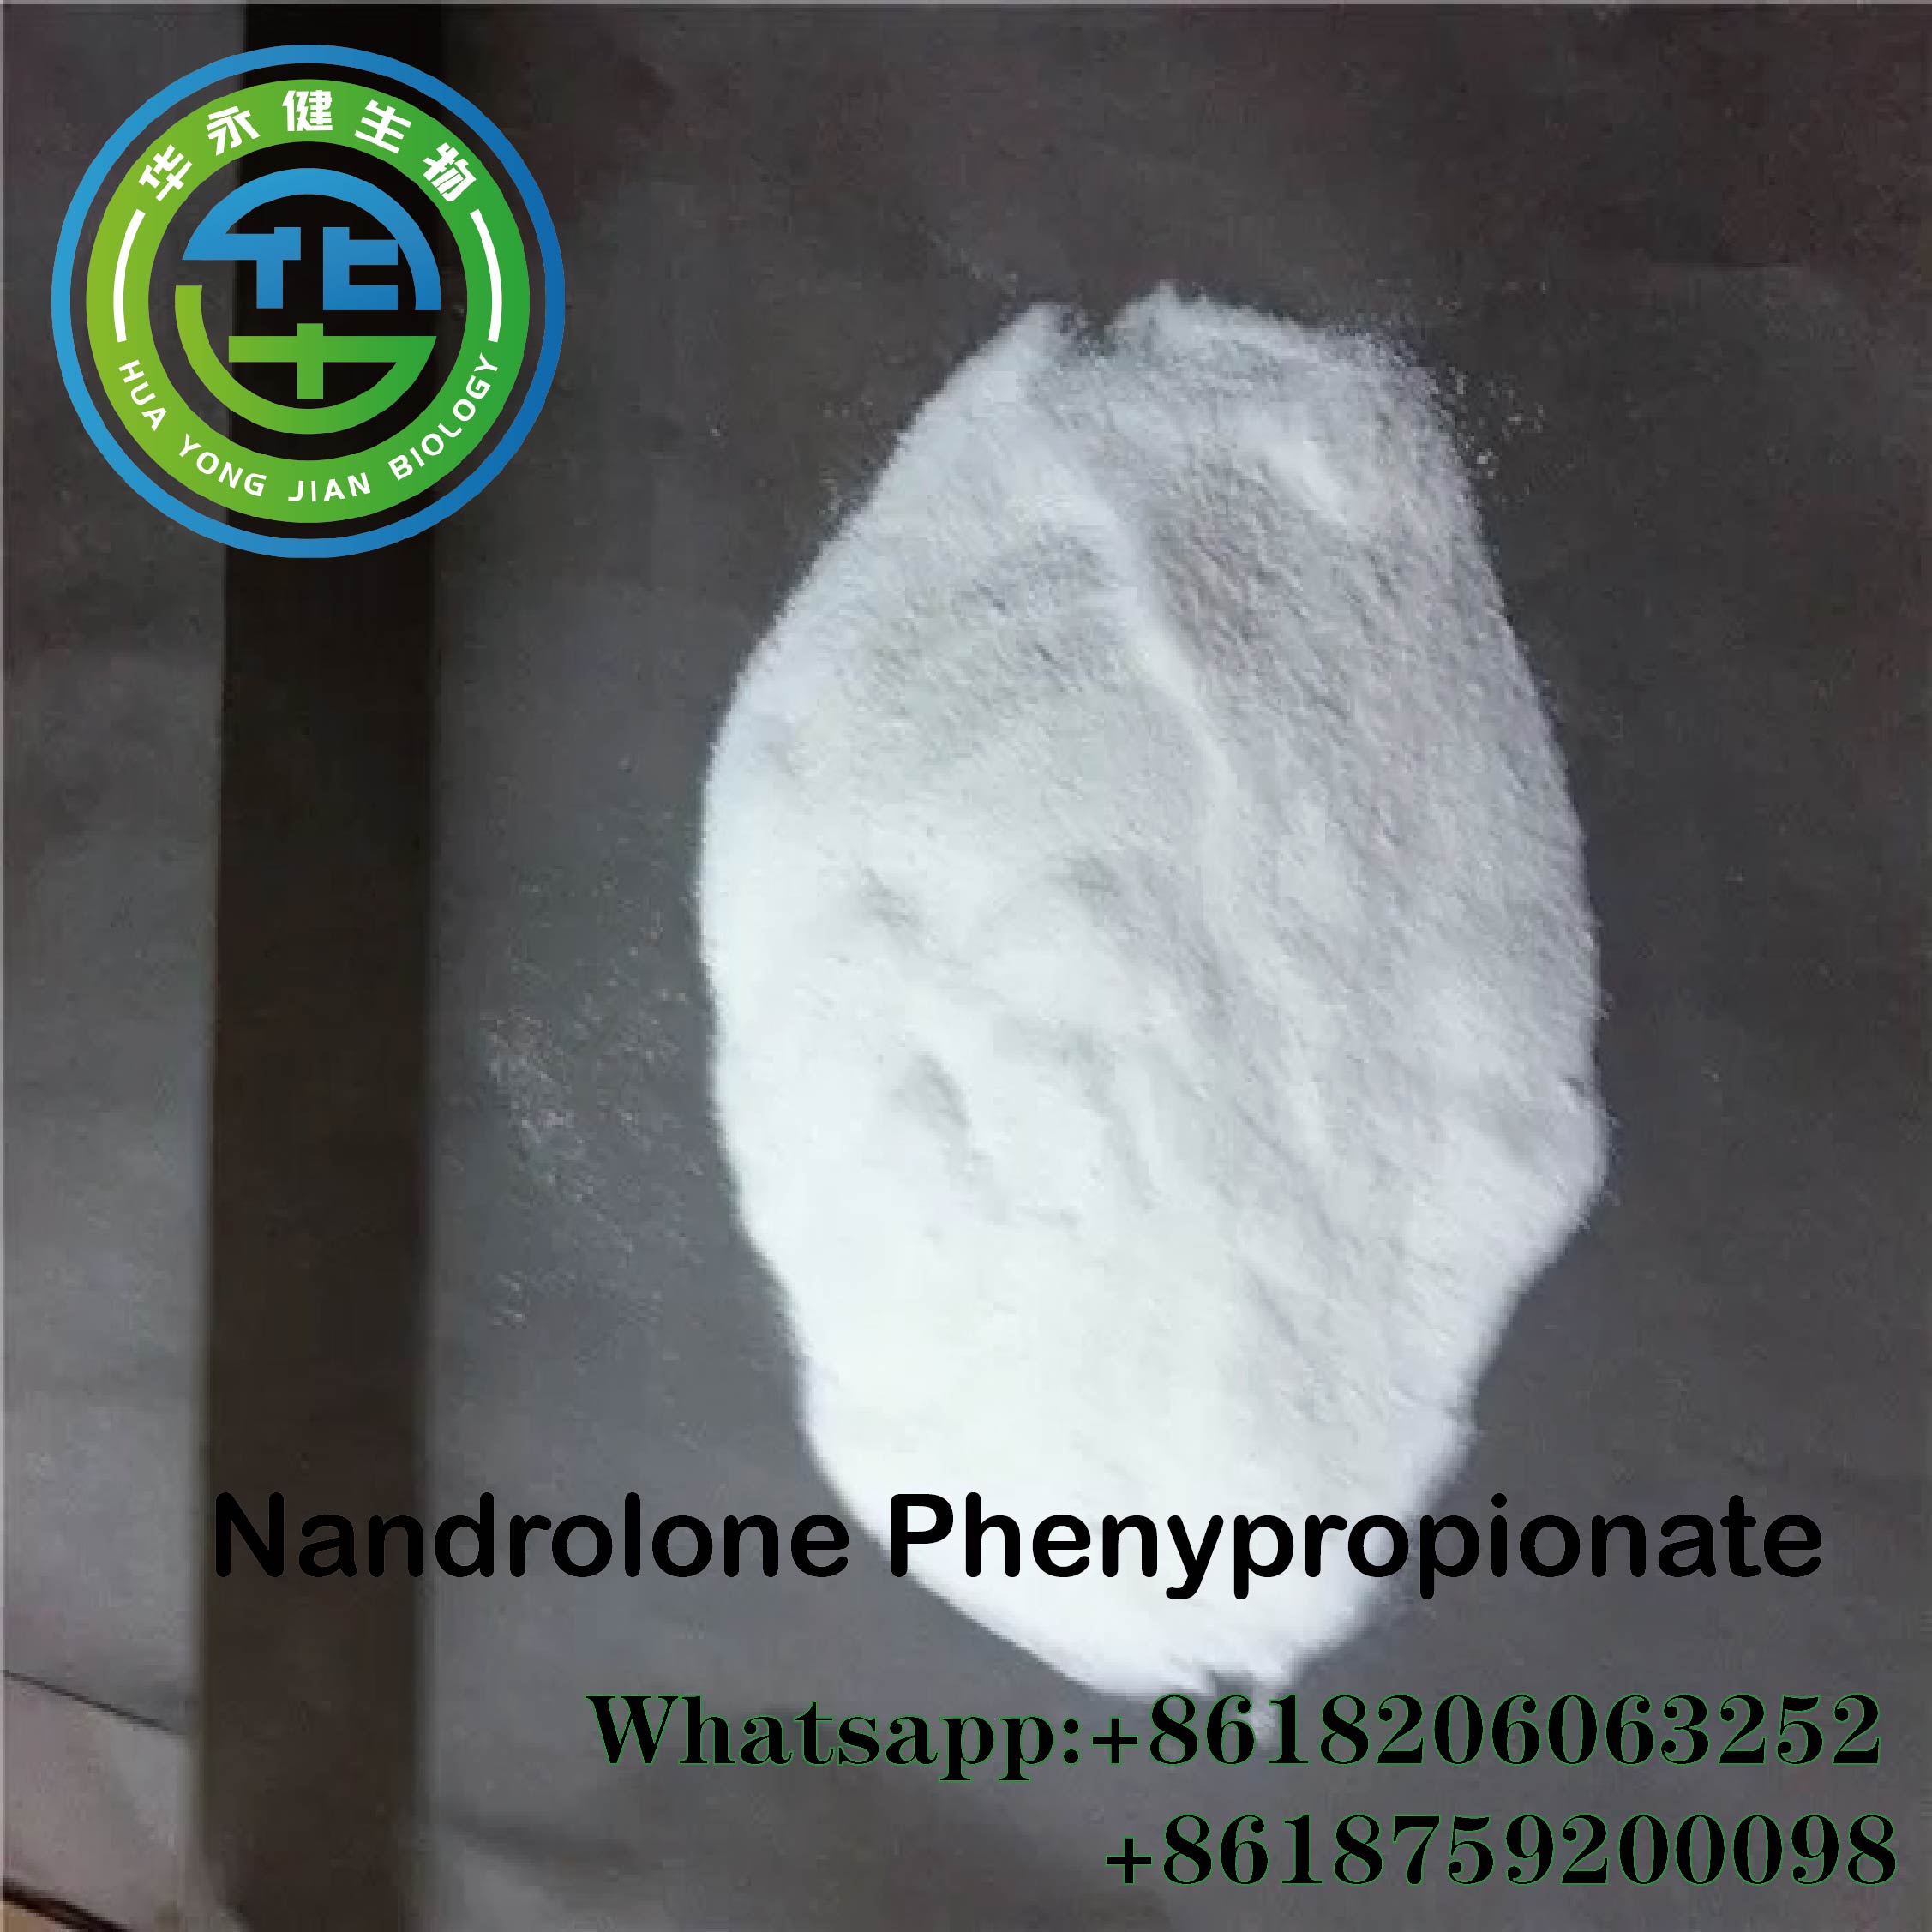 Anabolic Hormones Bulking Stack Steroids NPP Bodybuilding Male Hormone Nandrolone phenylpropionate steroid powder CAS 62-90-8